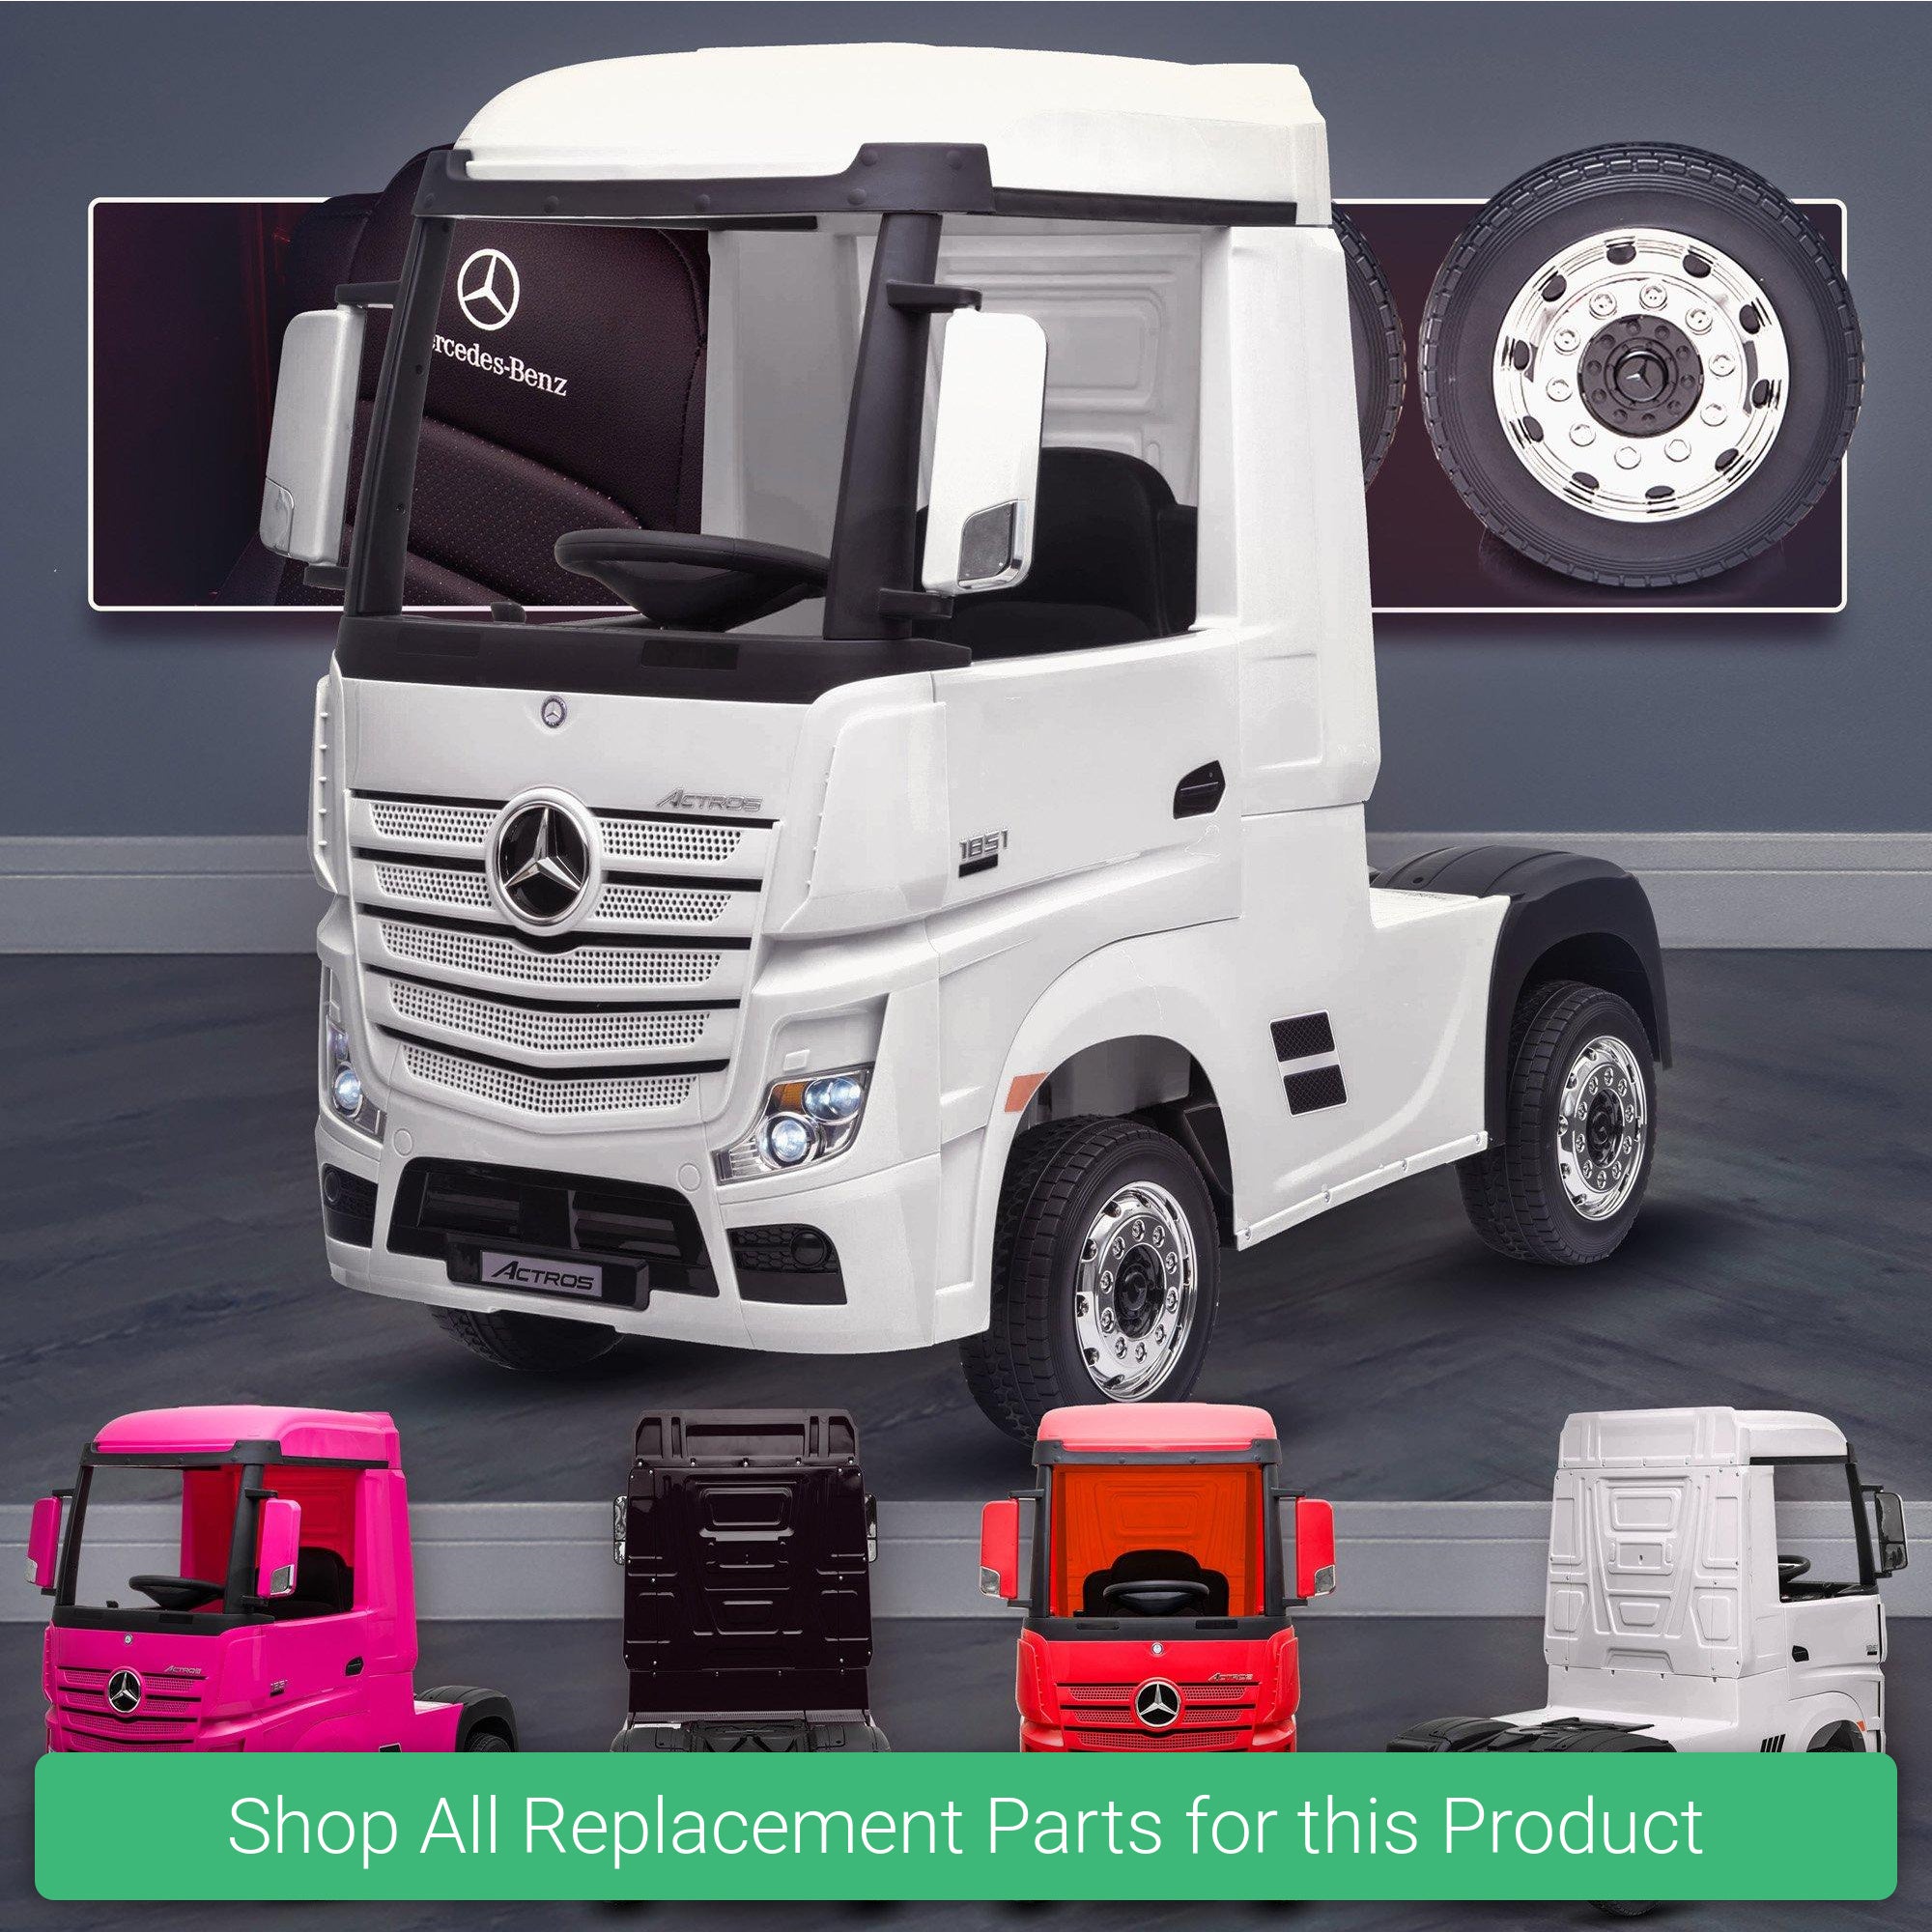 Replacement Parts and Spares for Kids Mercedes Actros Truck Lorry - MER-TRK-VARI - HL358